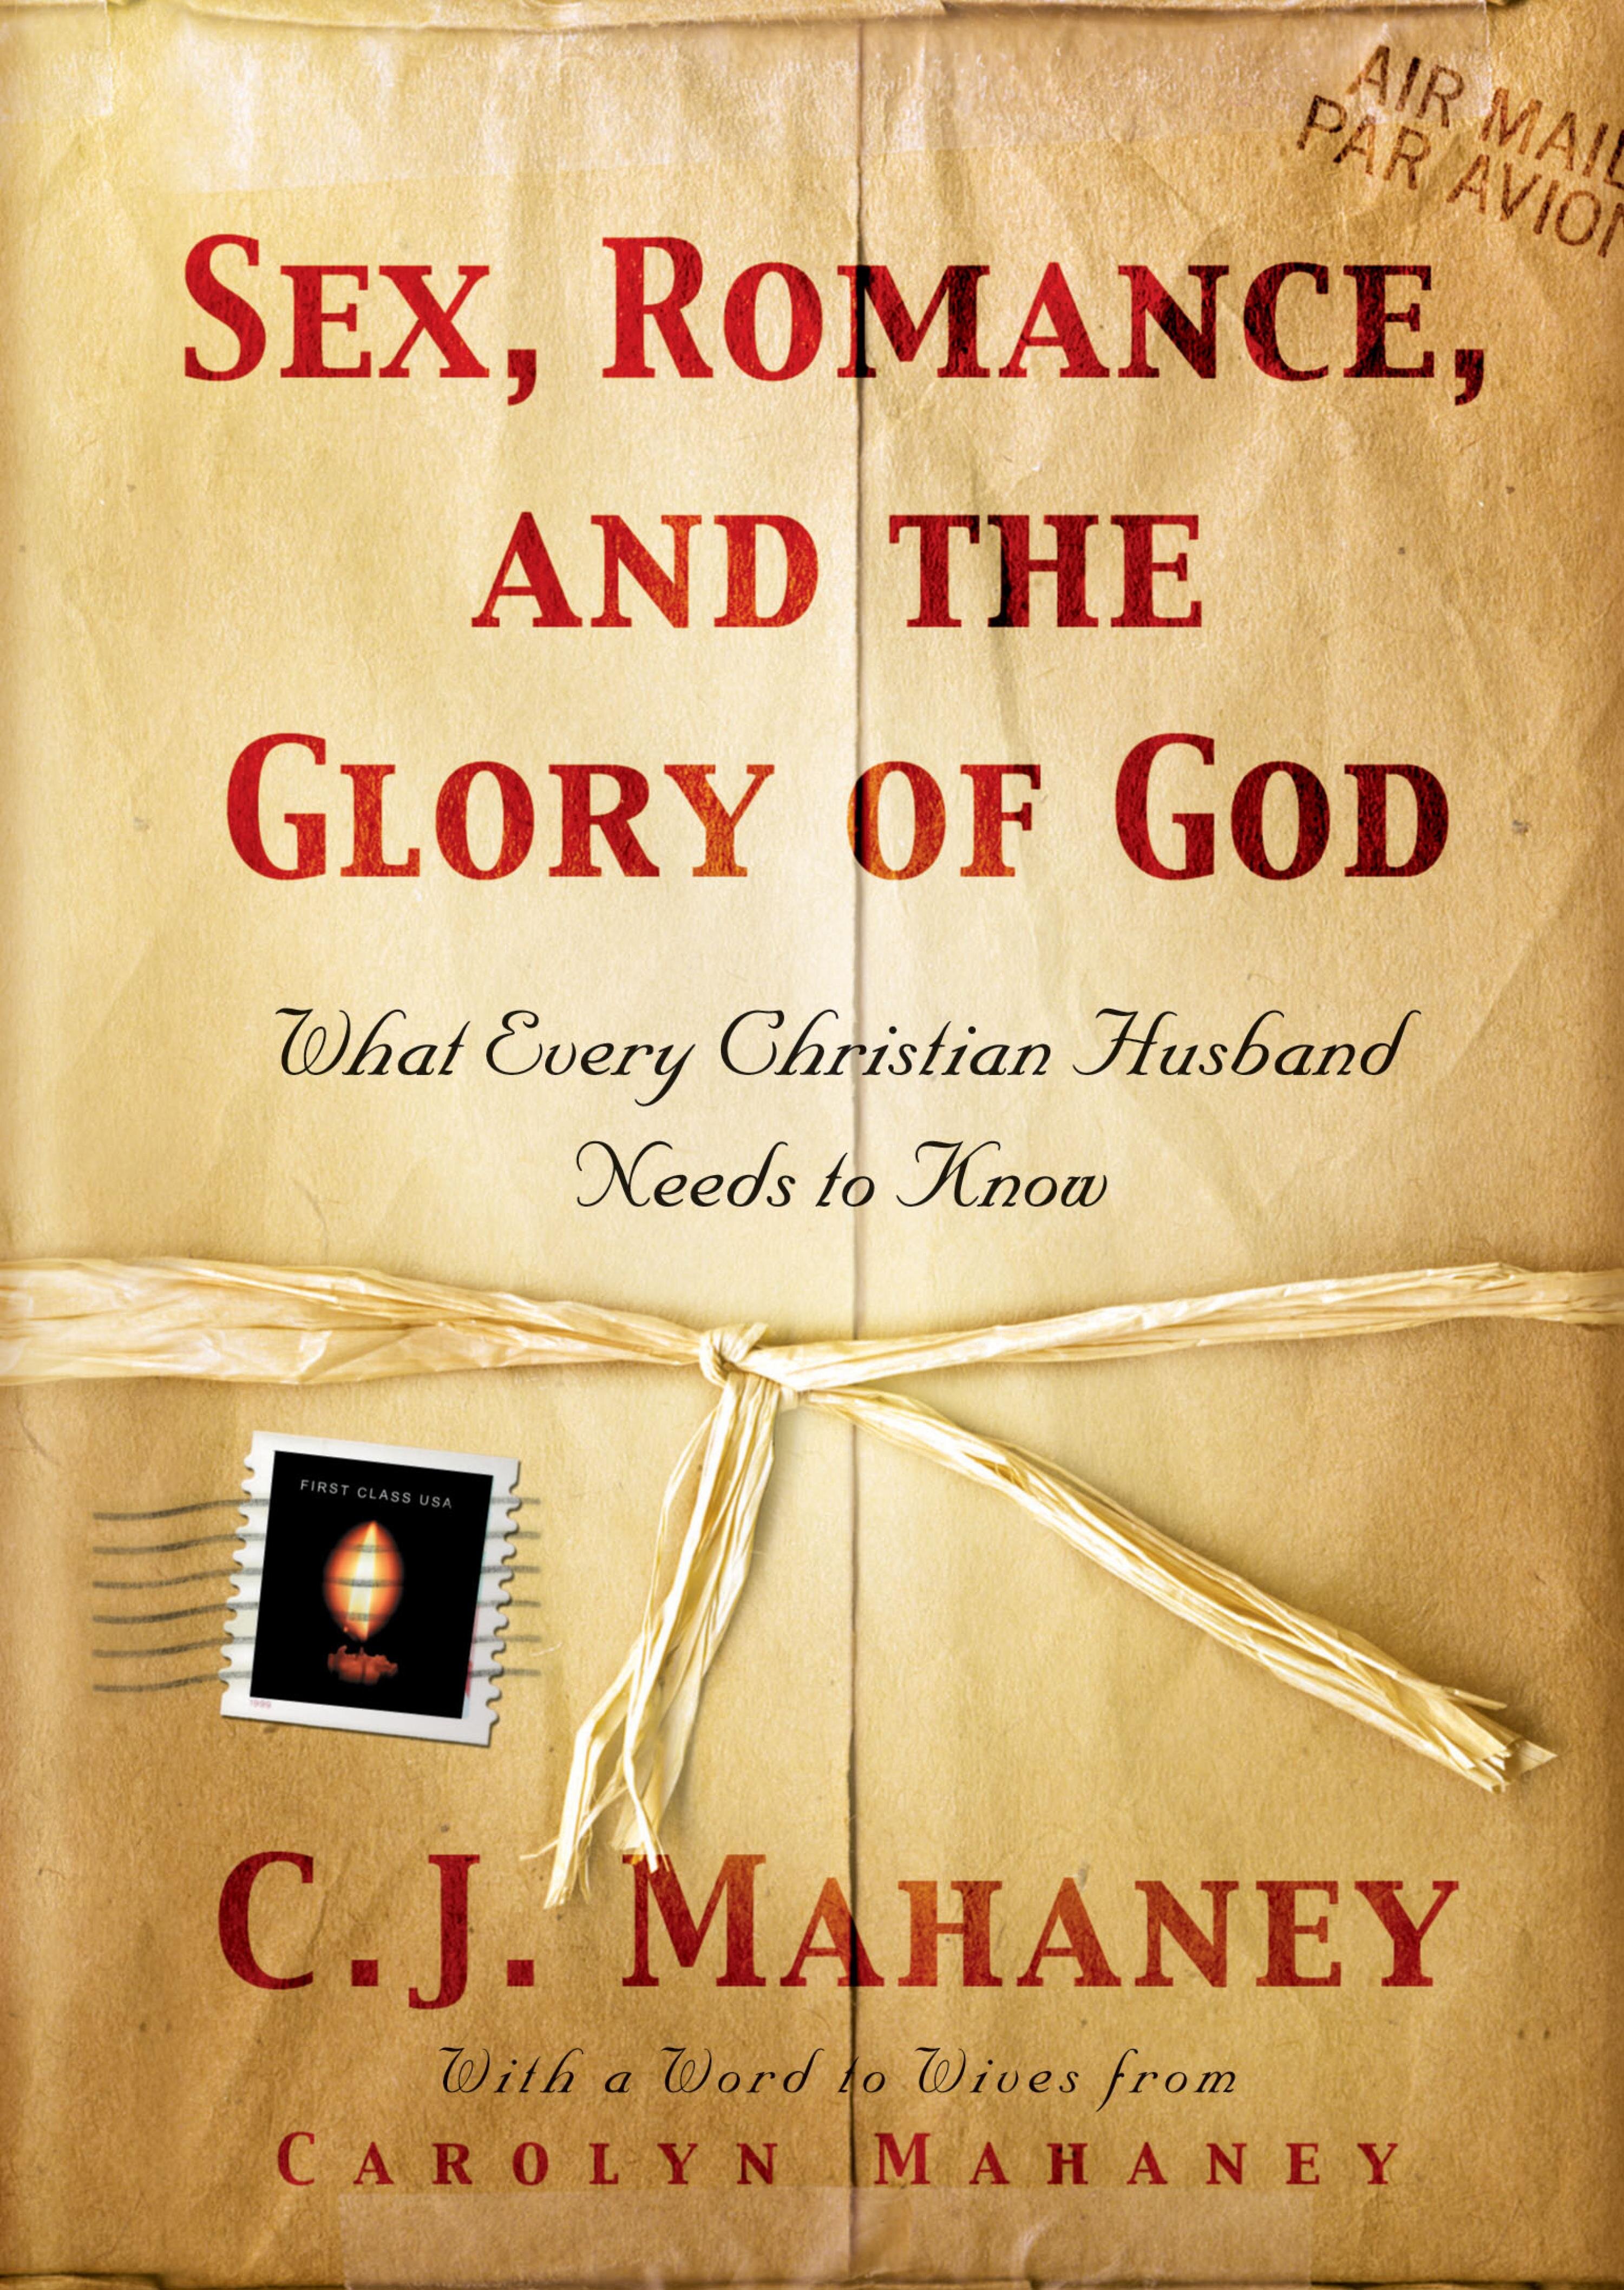 Sex, Romance, and the Glory of God (With a word to wives from Carolyn Mahaney) What Every Christian Husband Needs to Know Faithlife Ebooks image photo